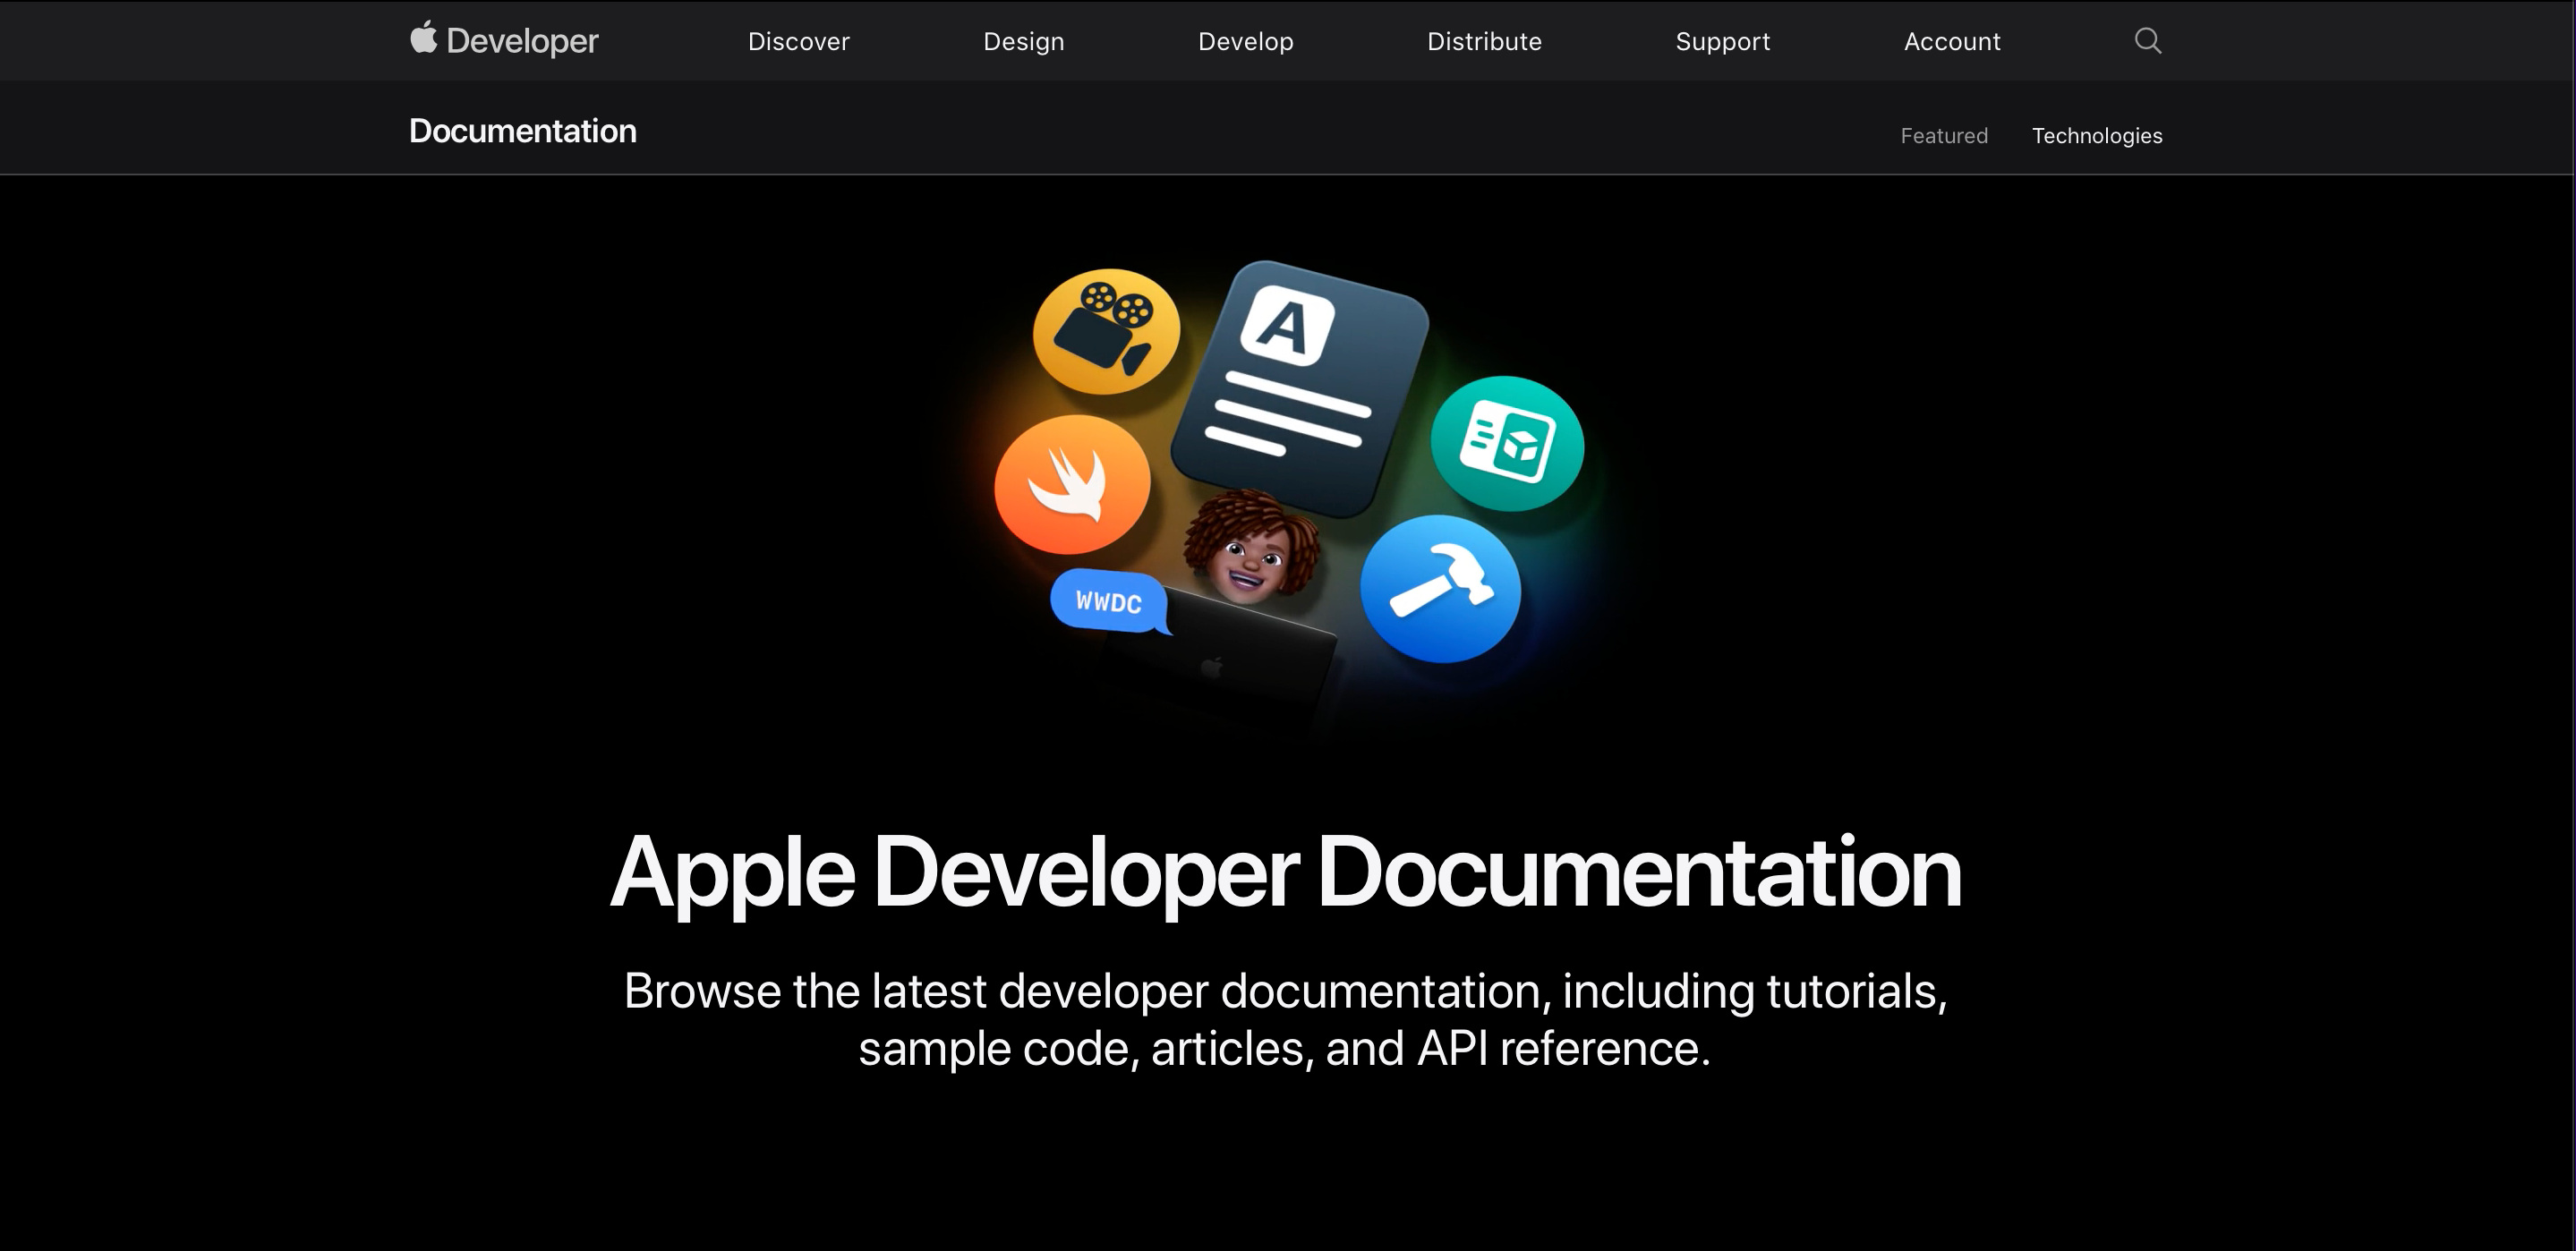 A screenshot from Apple's Developer page showing the new documentation for APIs.